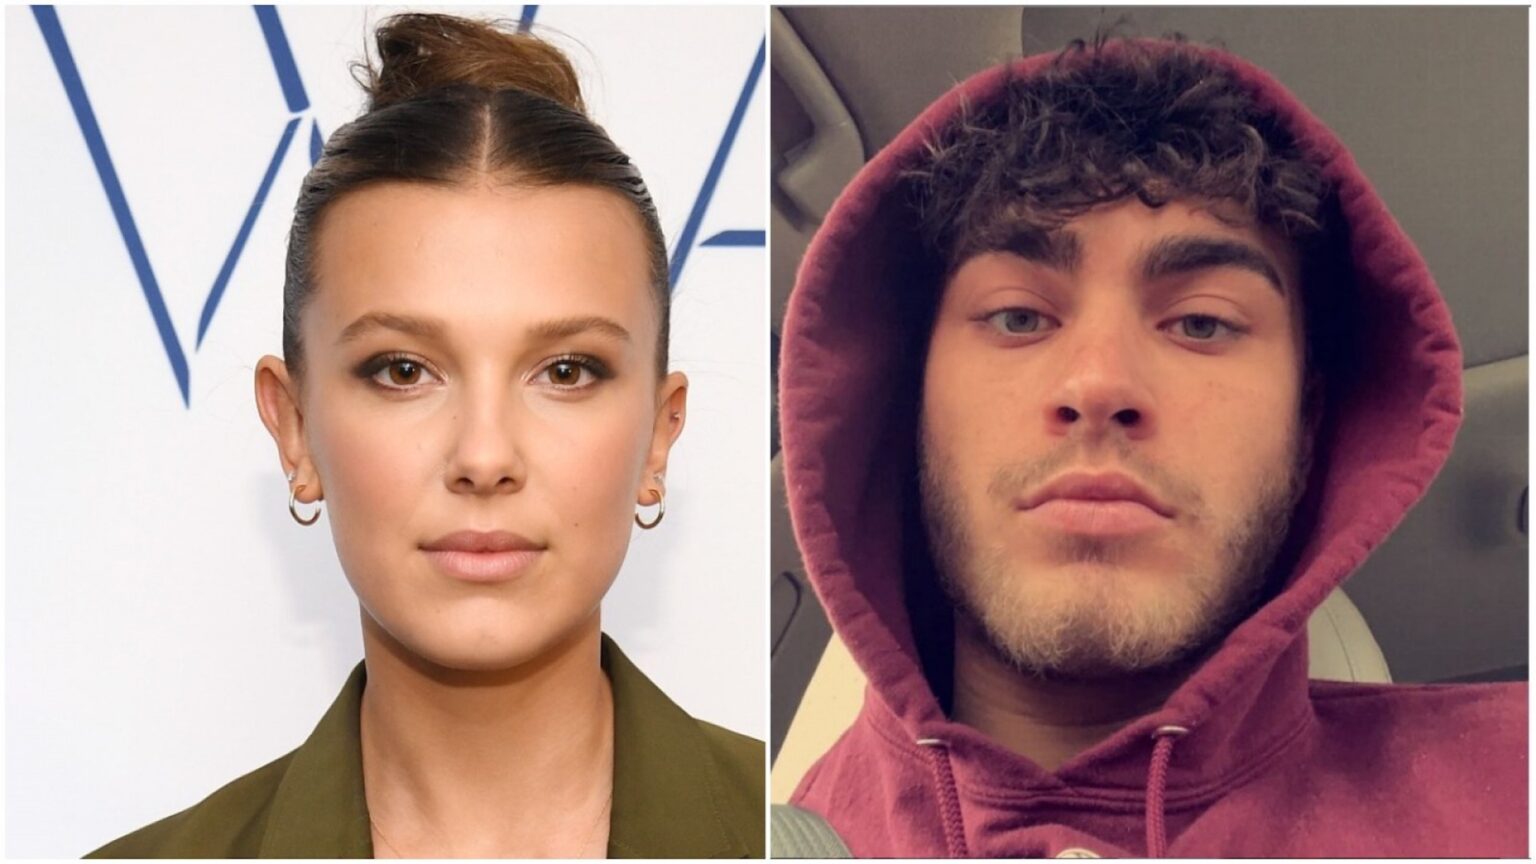 An alleged ex-boyfriend of Millie Bobby Brown claims her "groomed" the actress on Instagram Live. See if these horrific allegations are true.